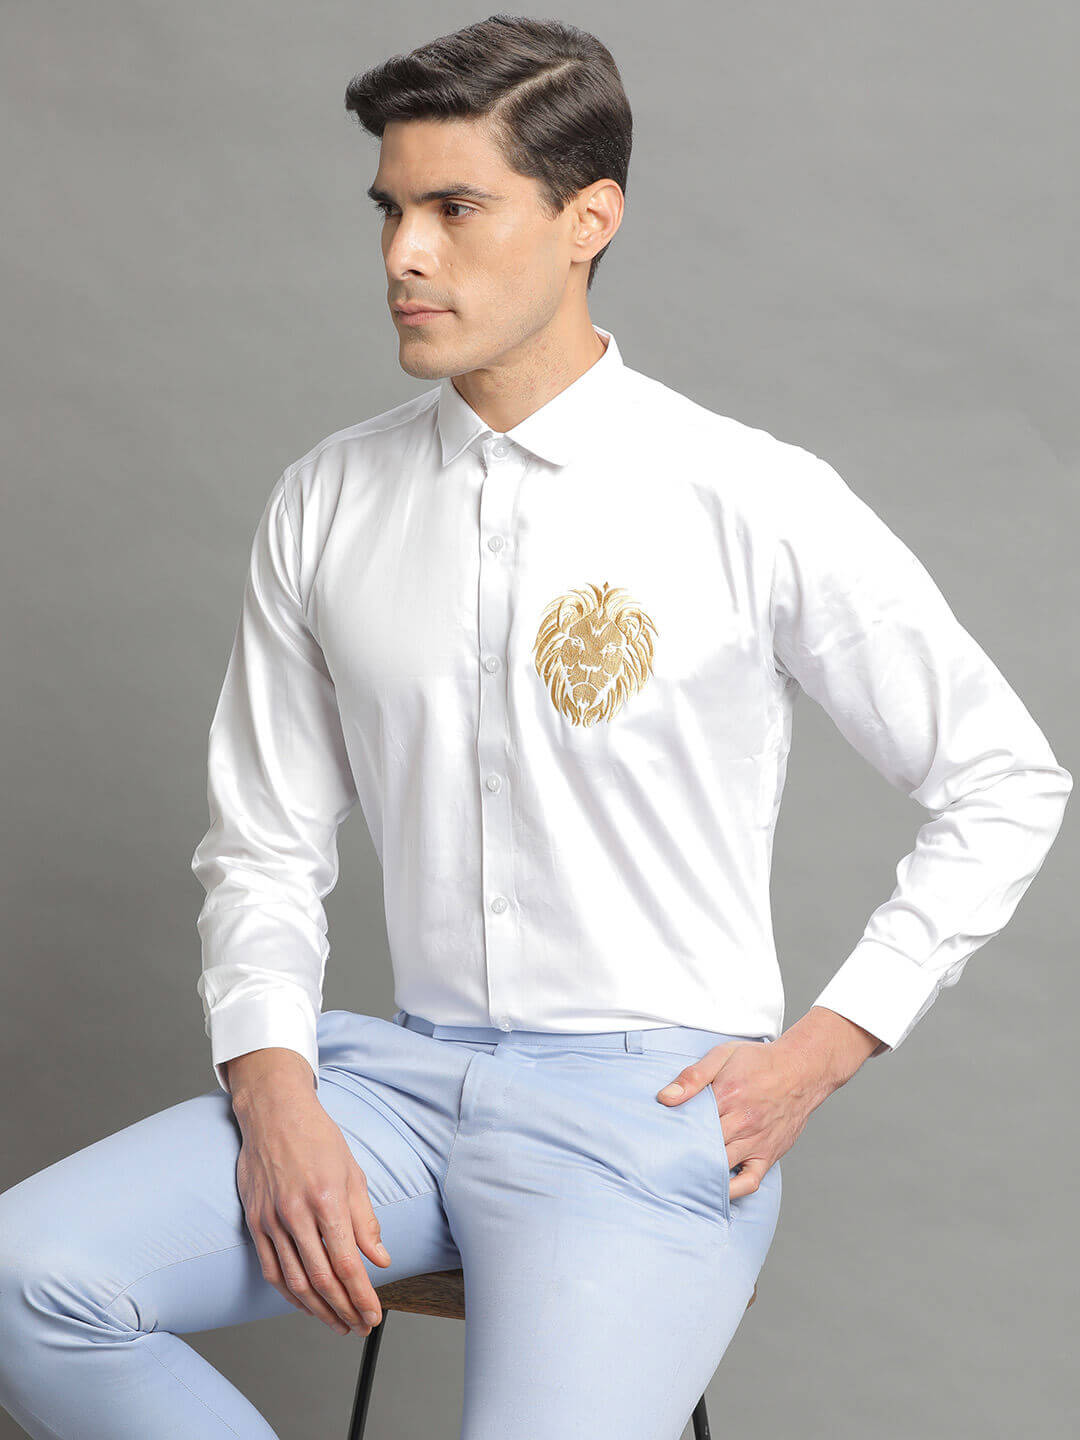 displaying image of Lion Embroidered White Shirt